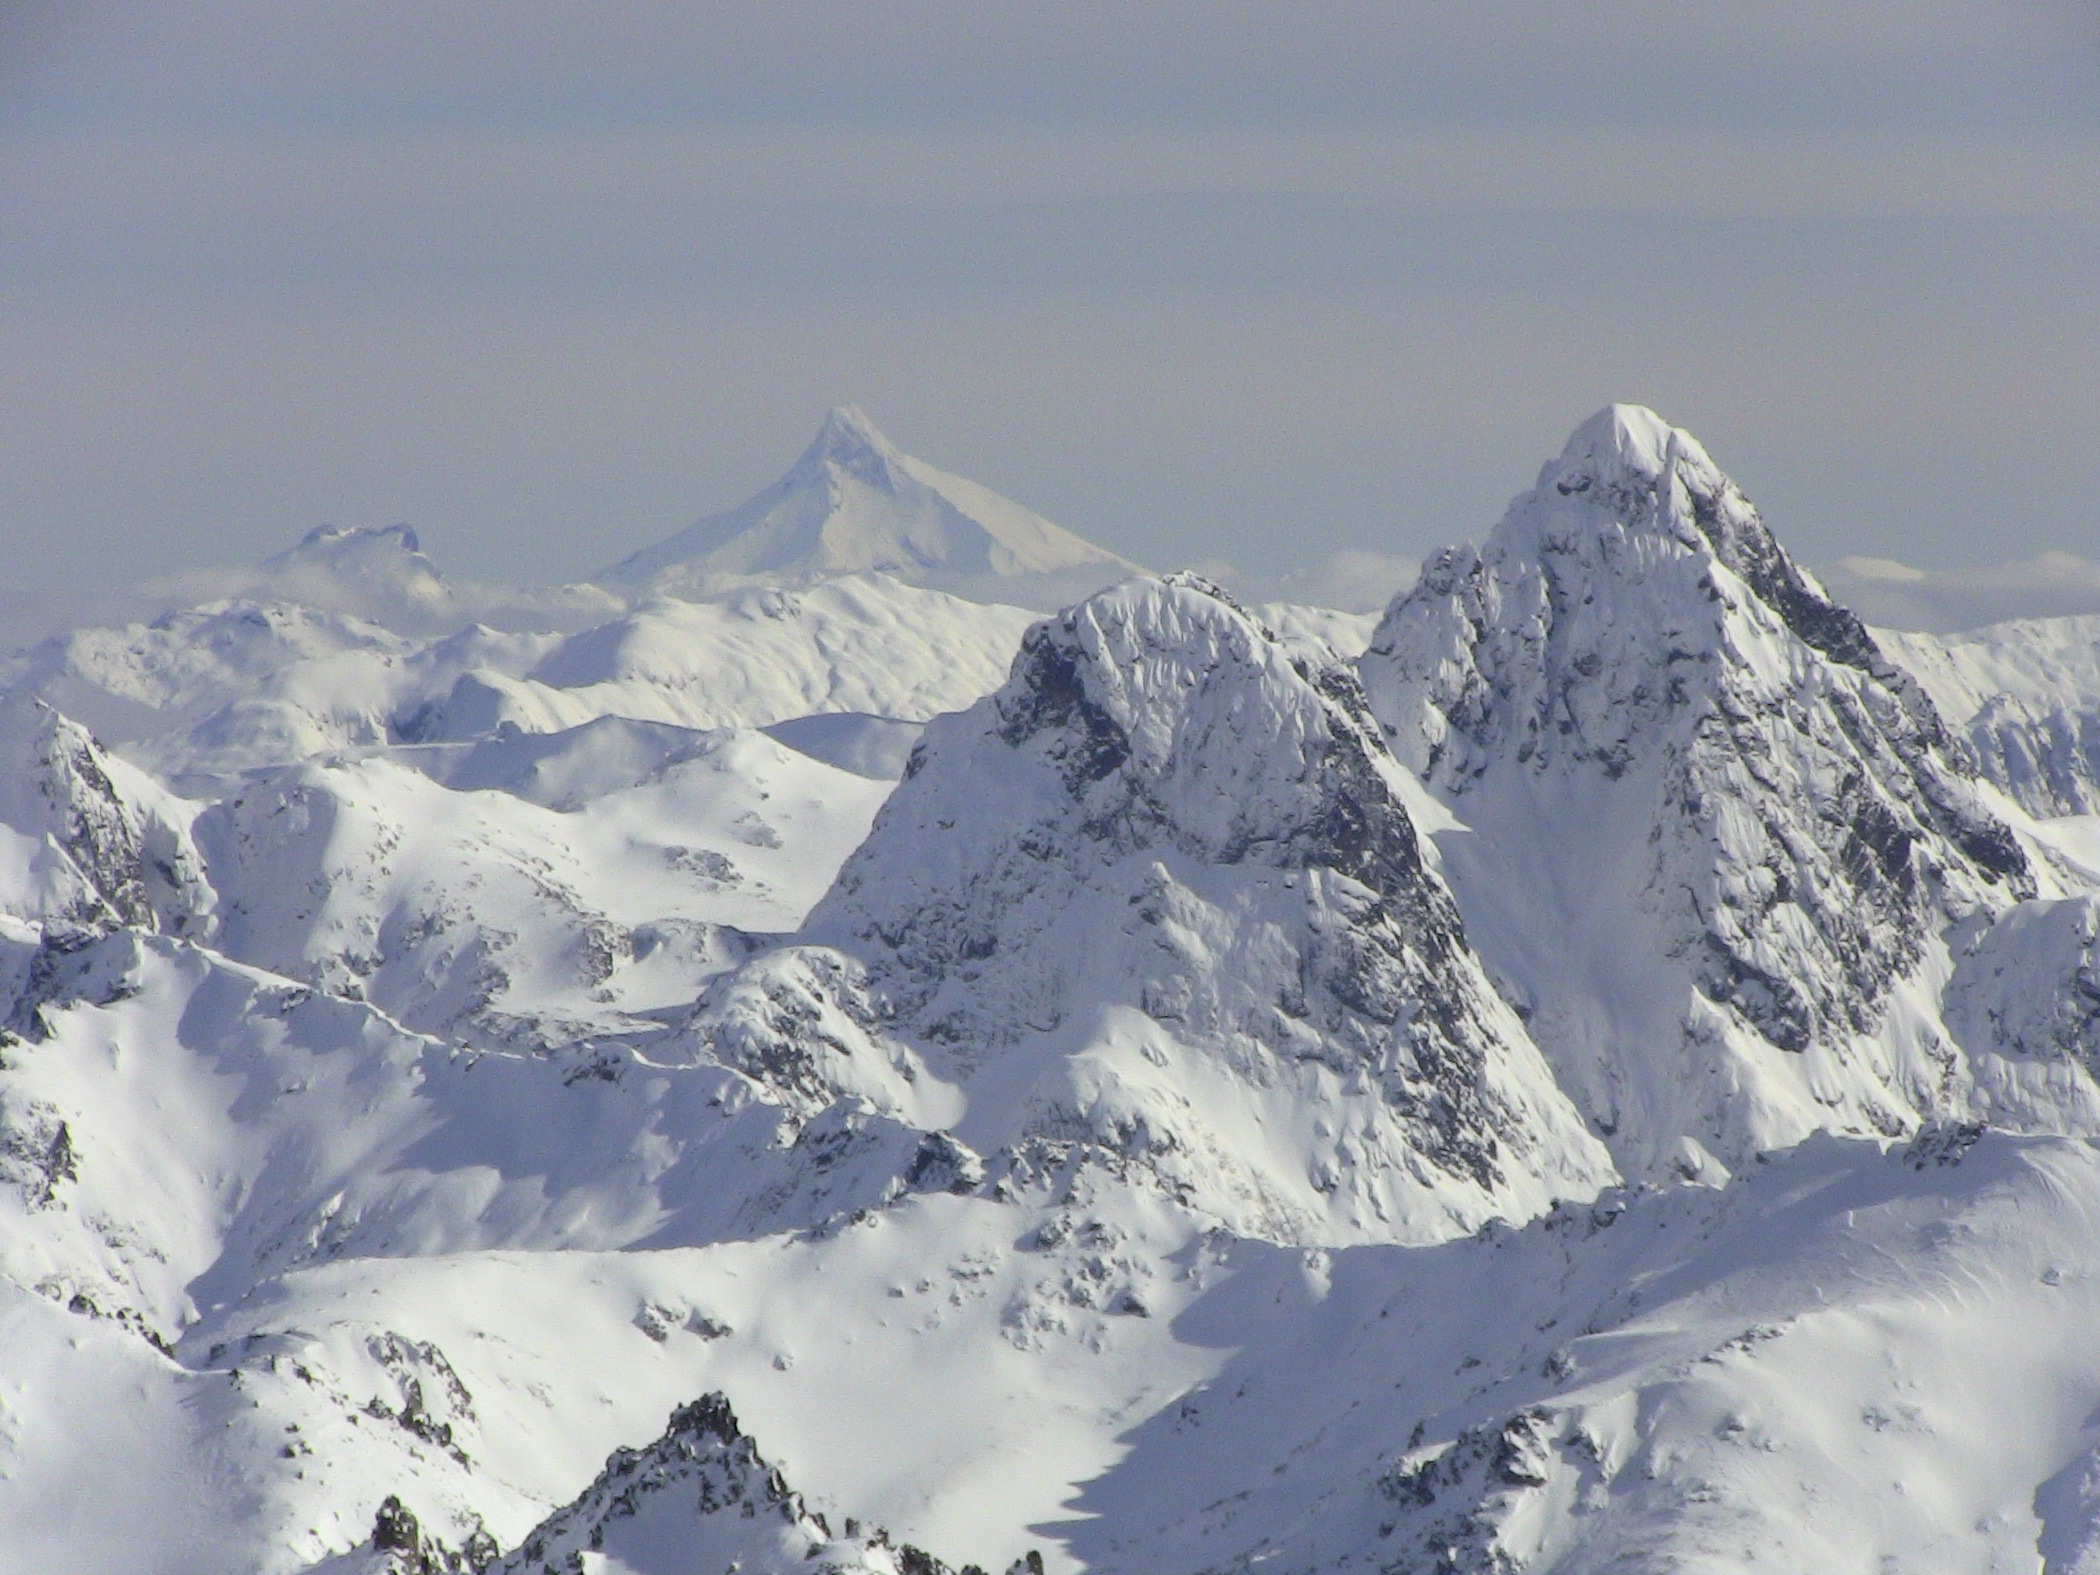 The looming peaks and volcanos of Bariloche, Argentina. photo: miles clark/snowbrains